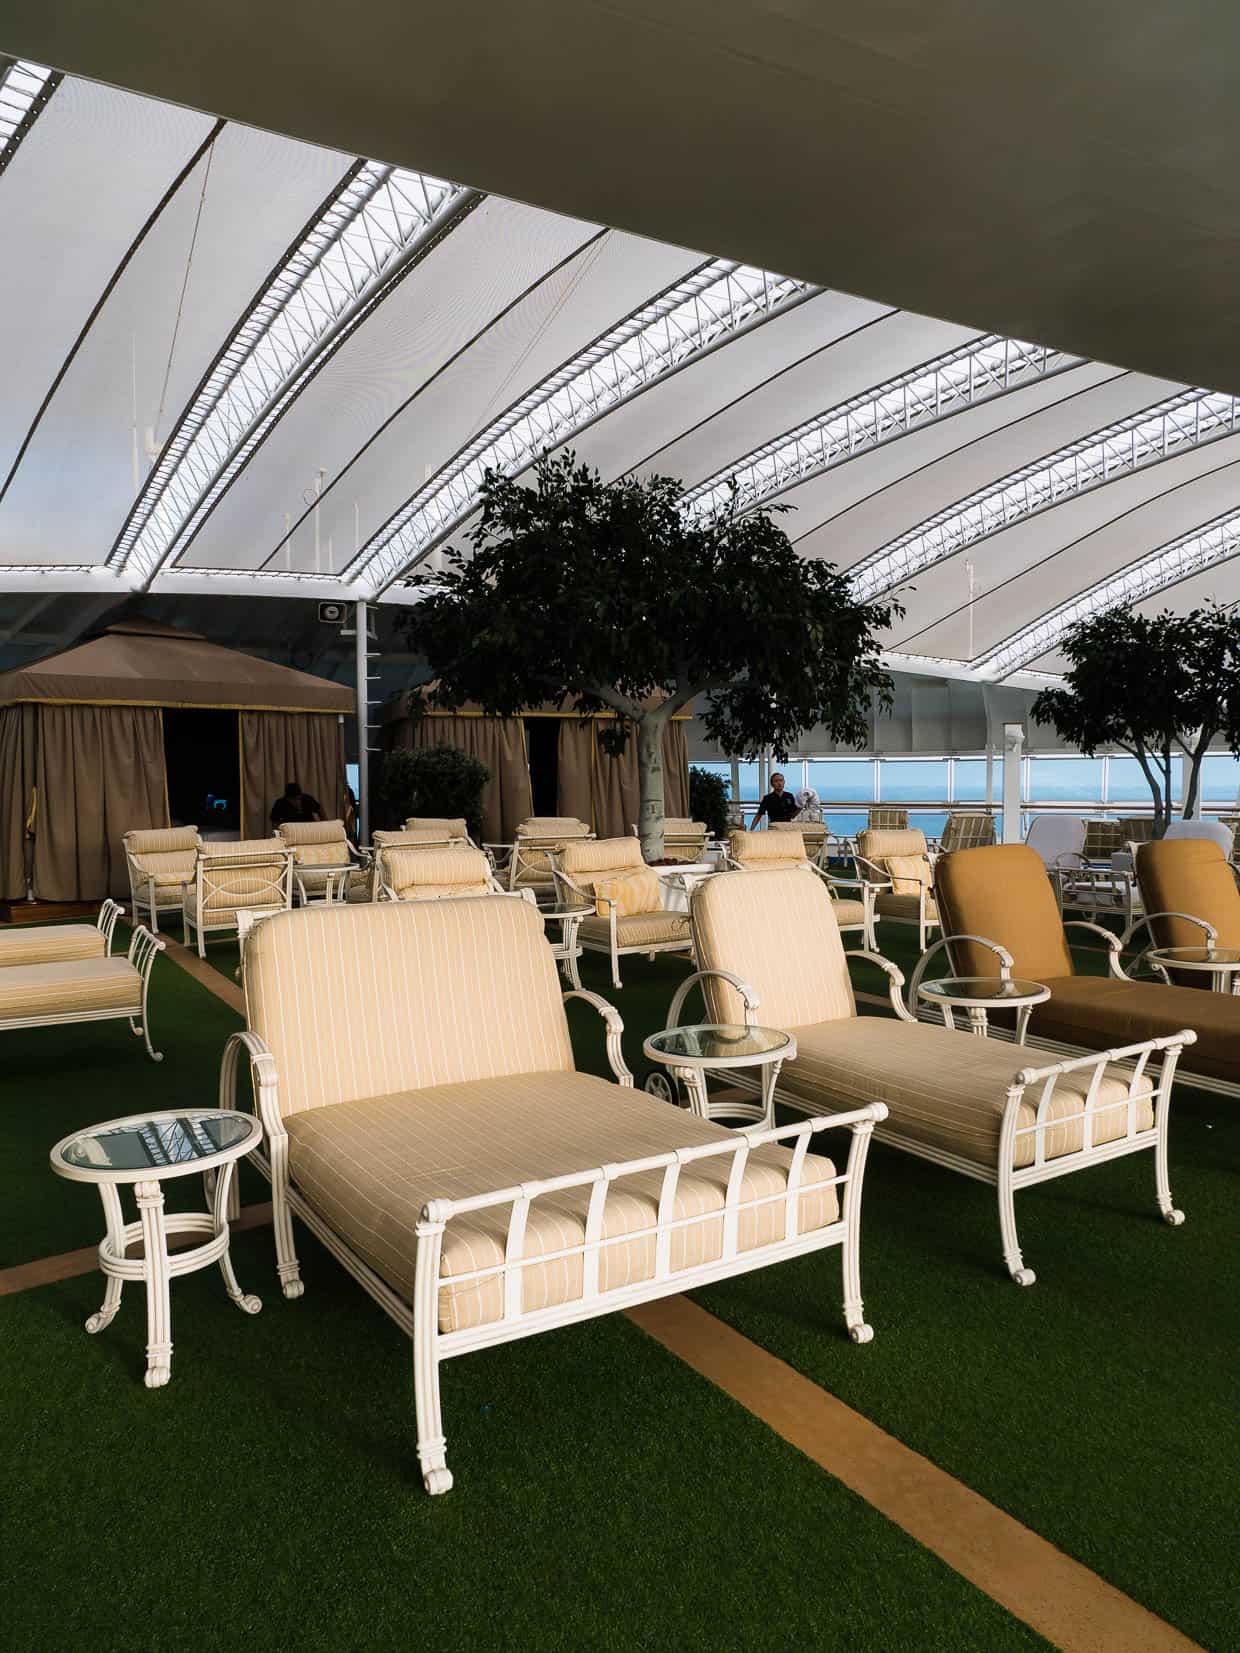 The Sanctuary is a peaceful escape on the Ruby Princess.